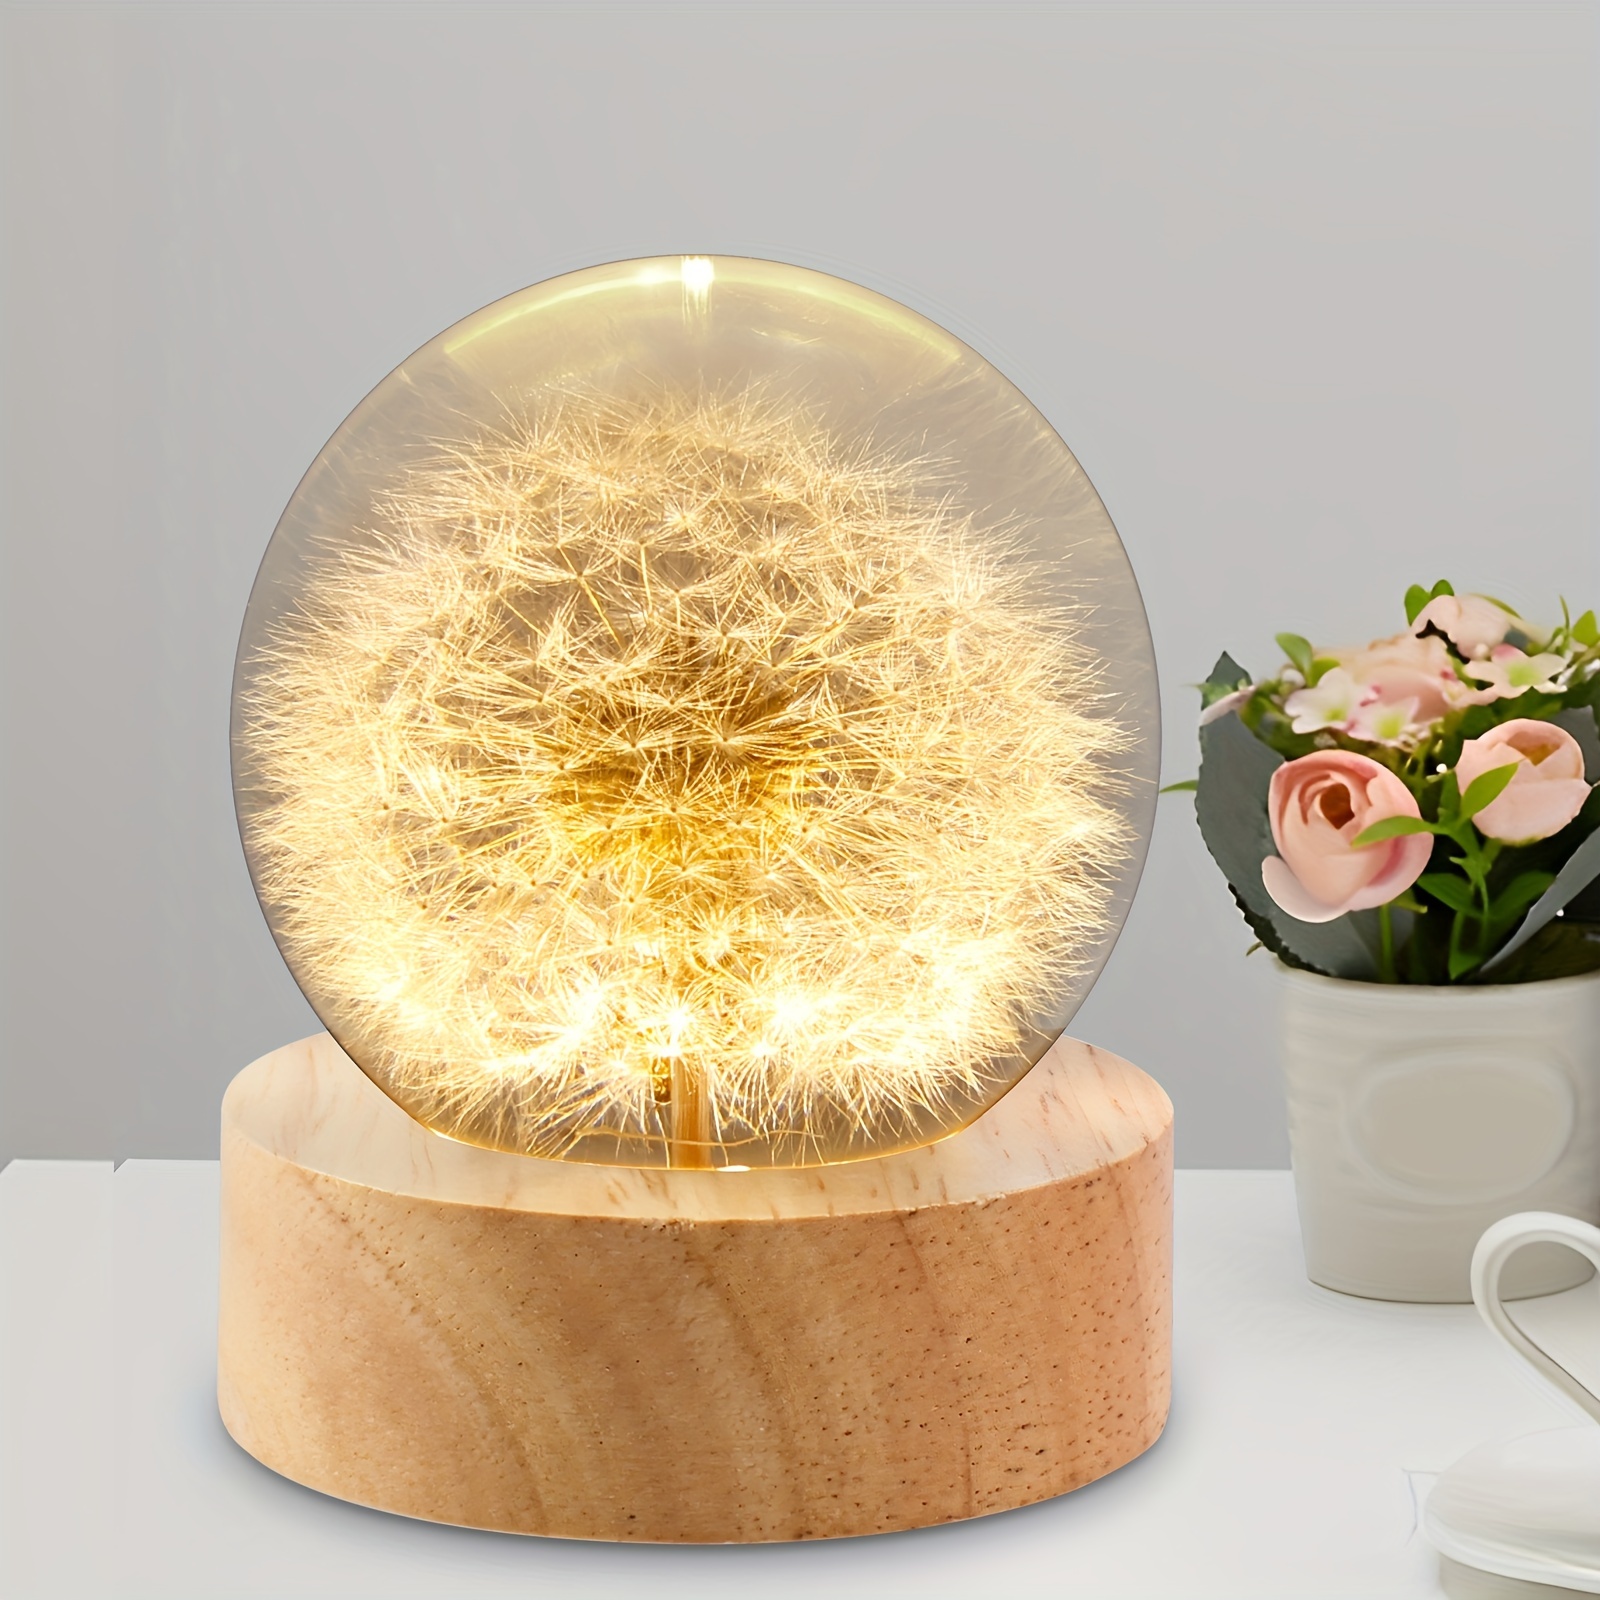 

Dandelion Crystal Ball Night Light With Wooden Base Usb Powered Dandelion Crystal Ball Night Lamp Fancy Crystal Led Night Light Portable Night Lamp Crystal Ball Dandelion In Glass Night Lamp For Home